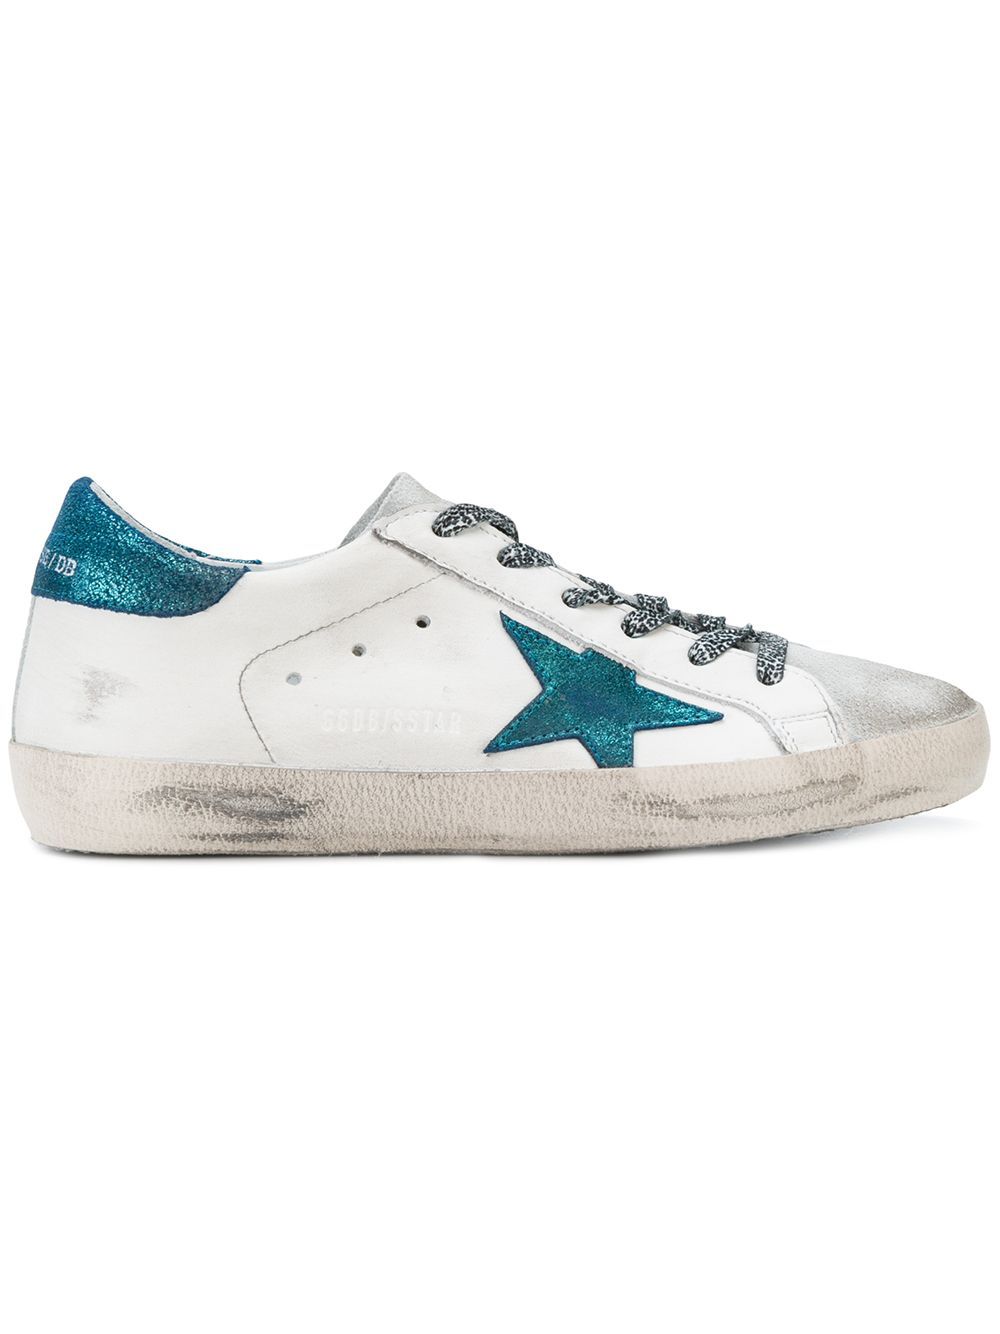 Golden Goose Deluxe Brand Superstar sneakers - White | FarFetch Global